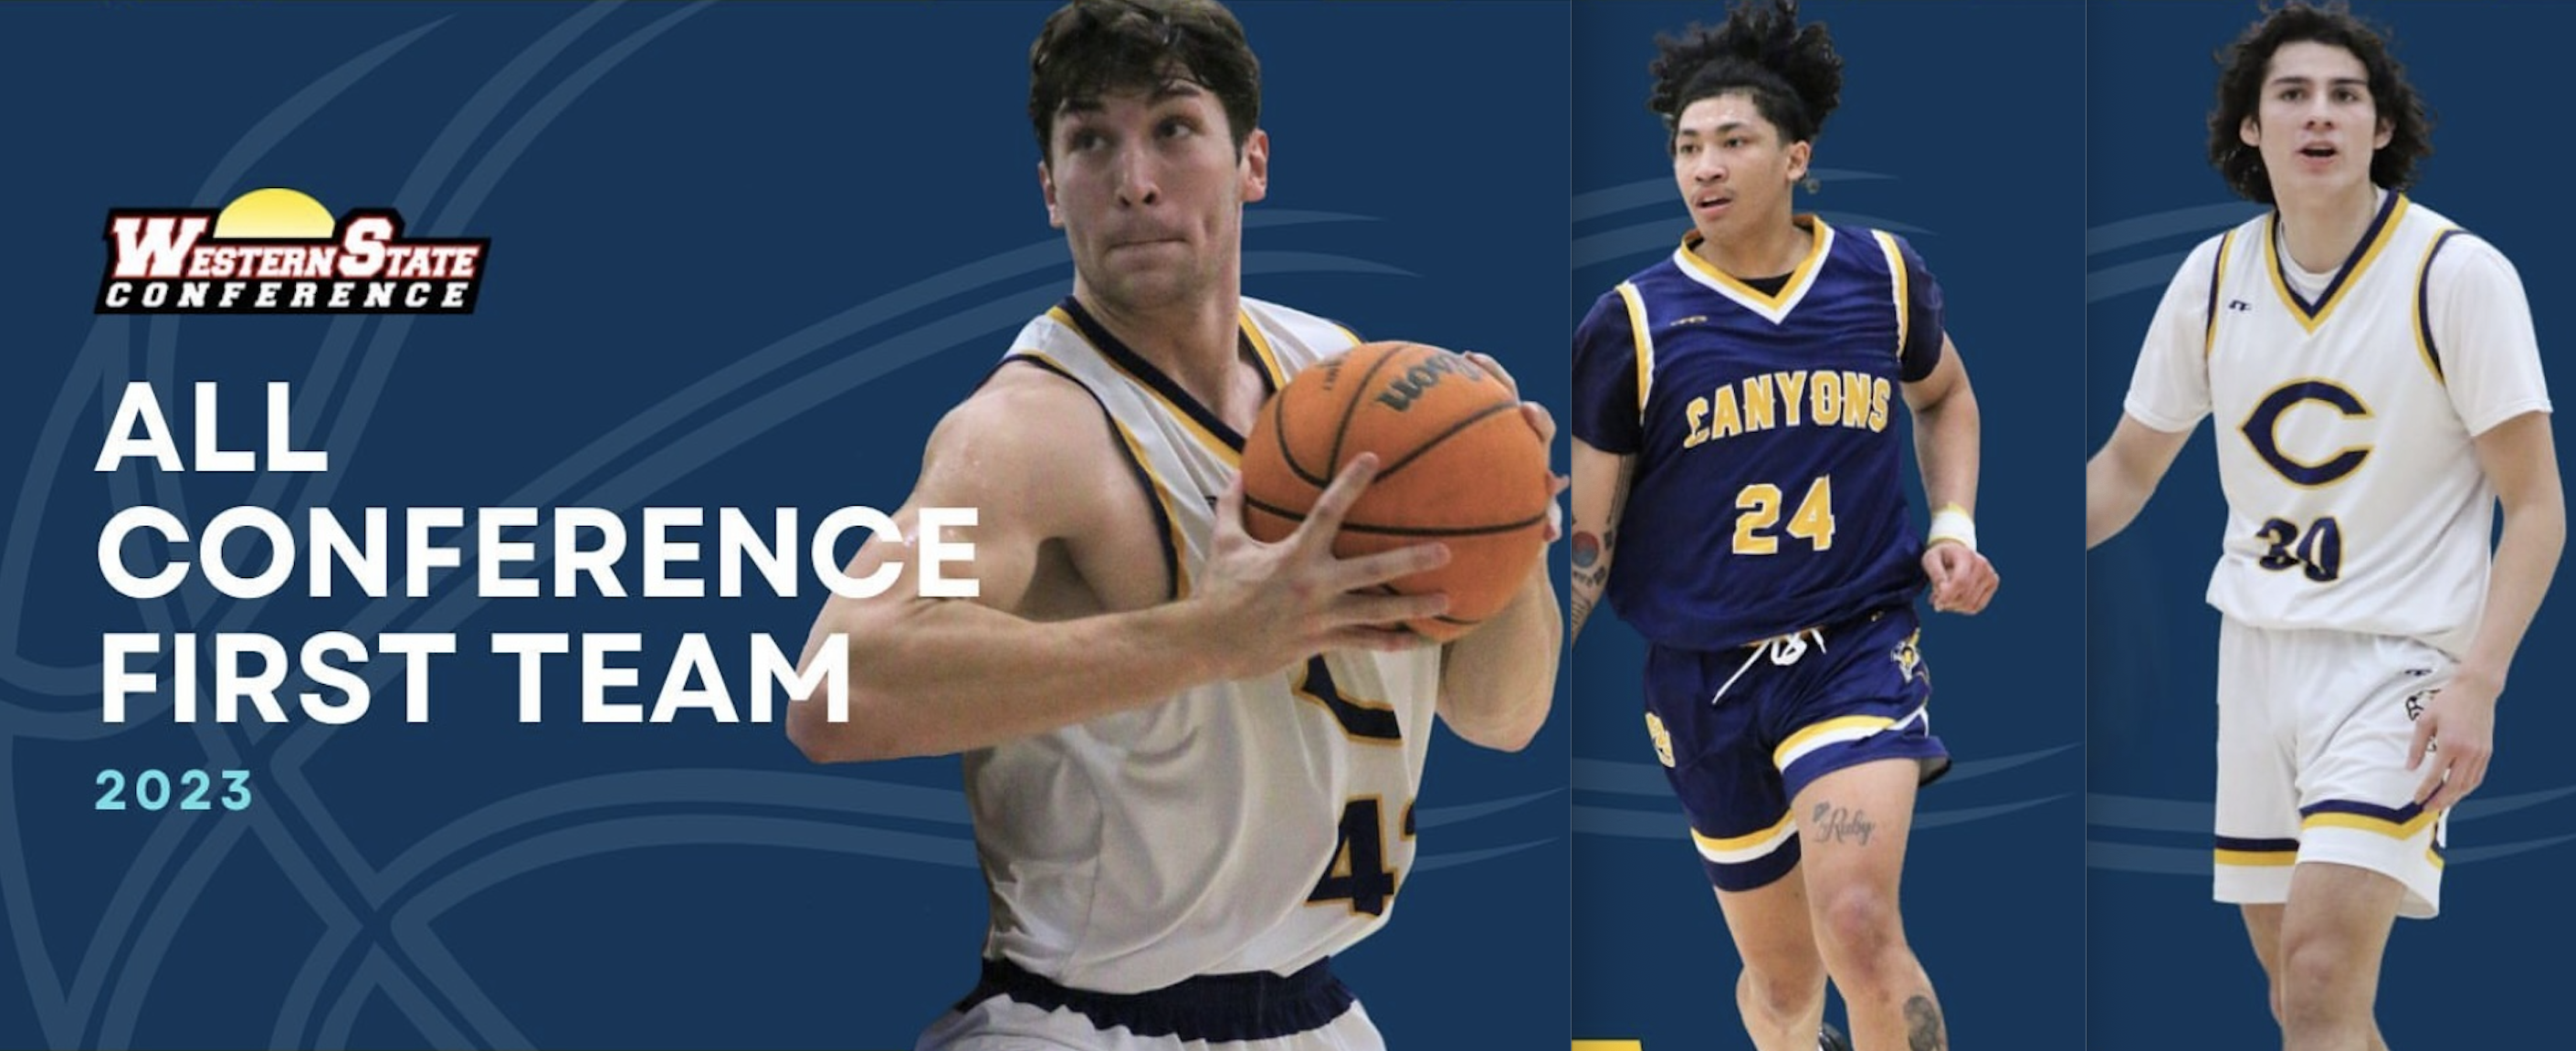 College of the Canyons men's basketball photo collage featuring Jonah El-Farra, Andrew Henderson and Dillon Barrientos.